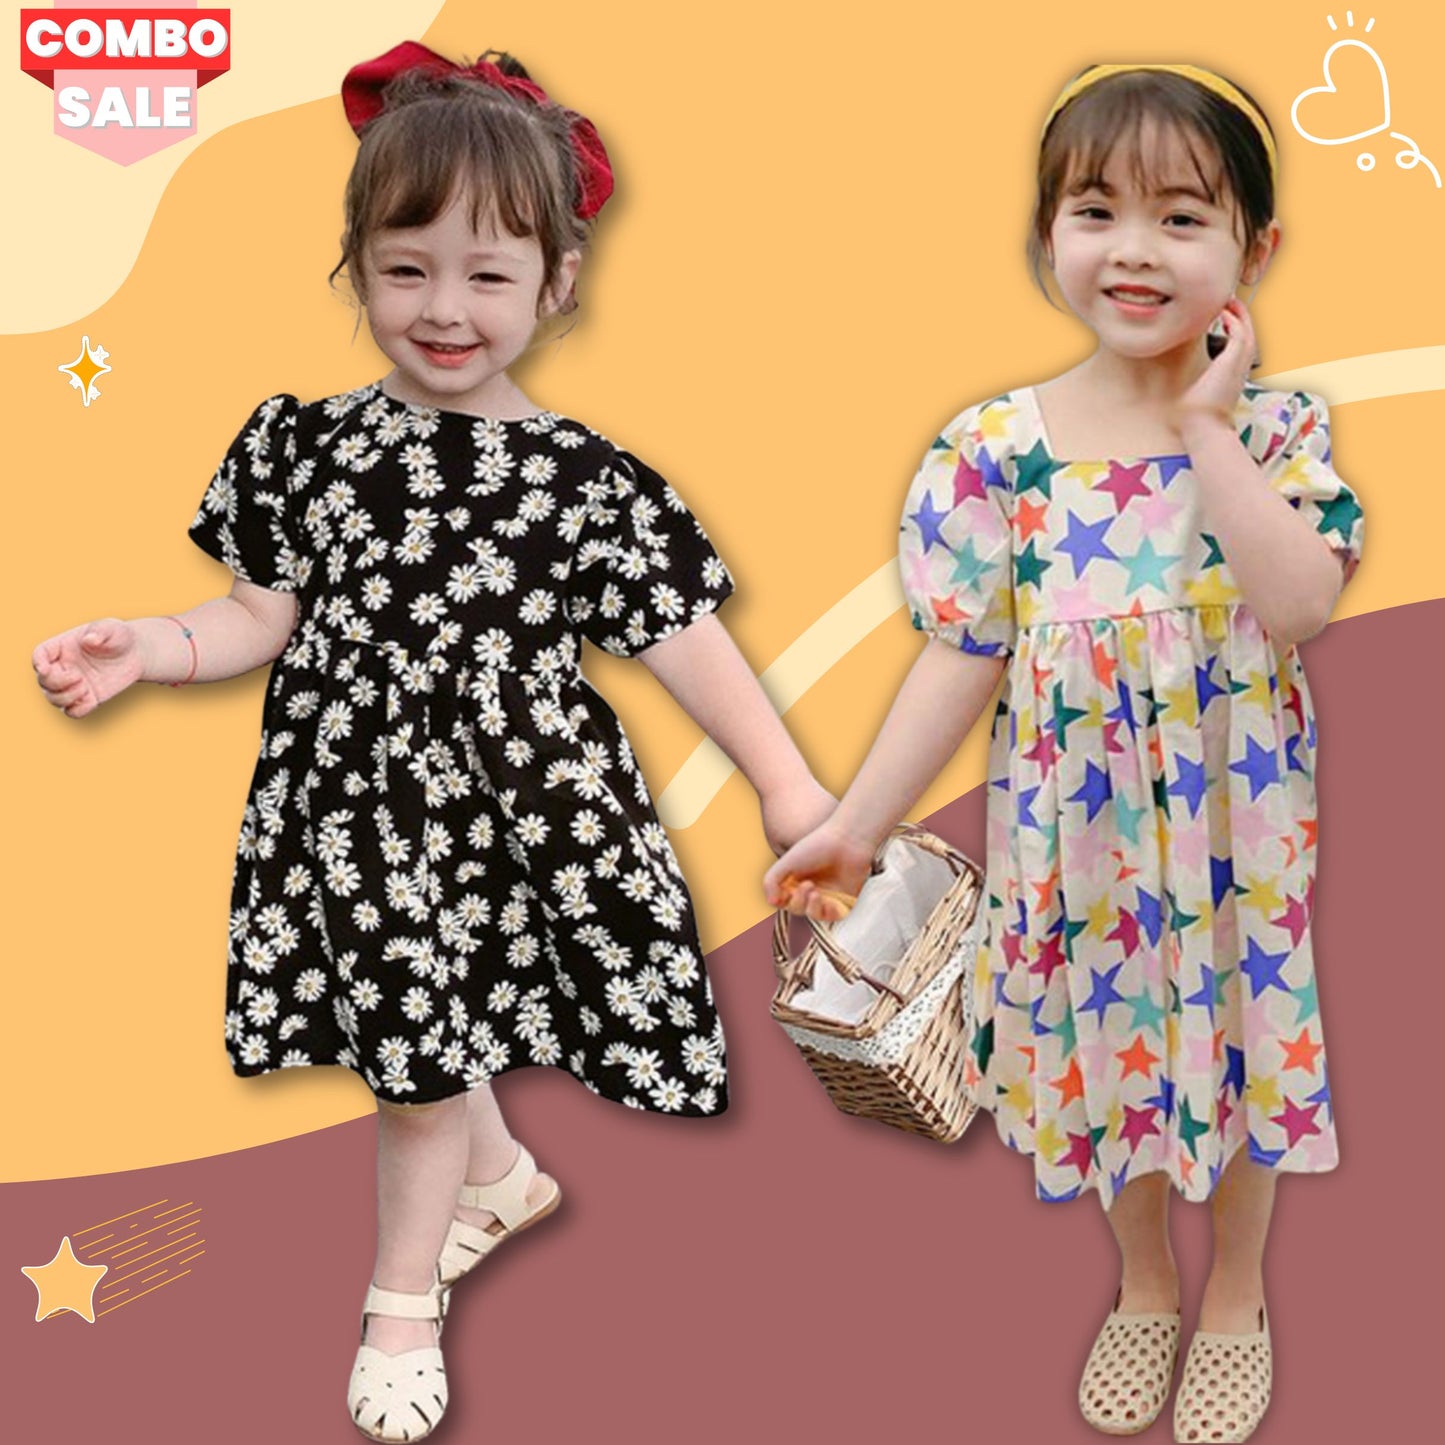 BabyGirl Princess Multi Star & Red Floral Tunic Dress (Combo Pack Of 2) for Baby Girls.